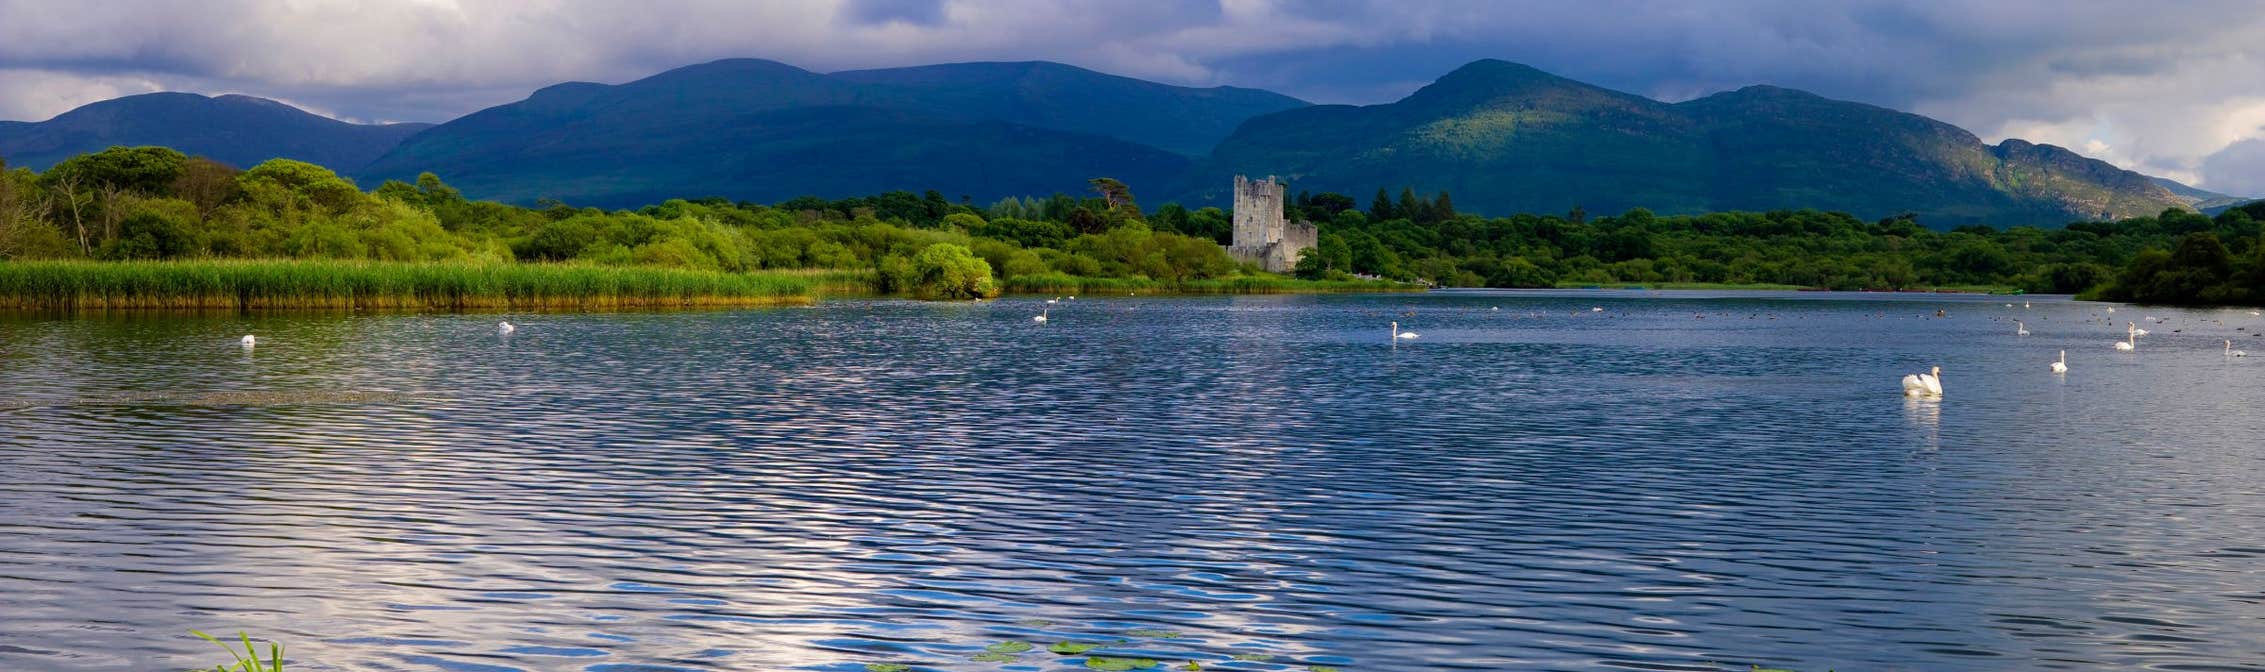 Lily pads in the water in front of Killarney Castle in County Kerry